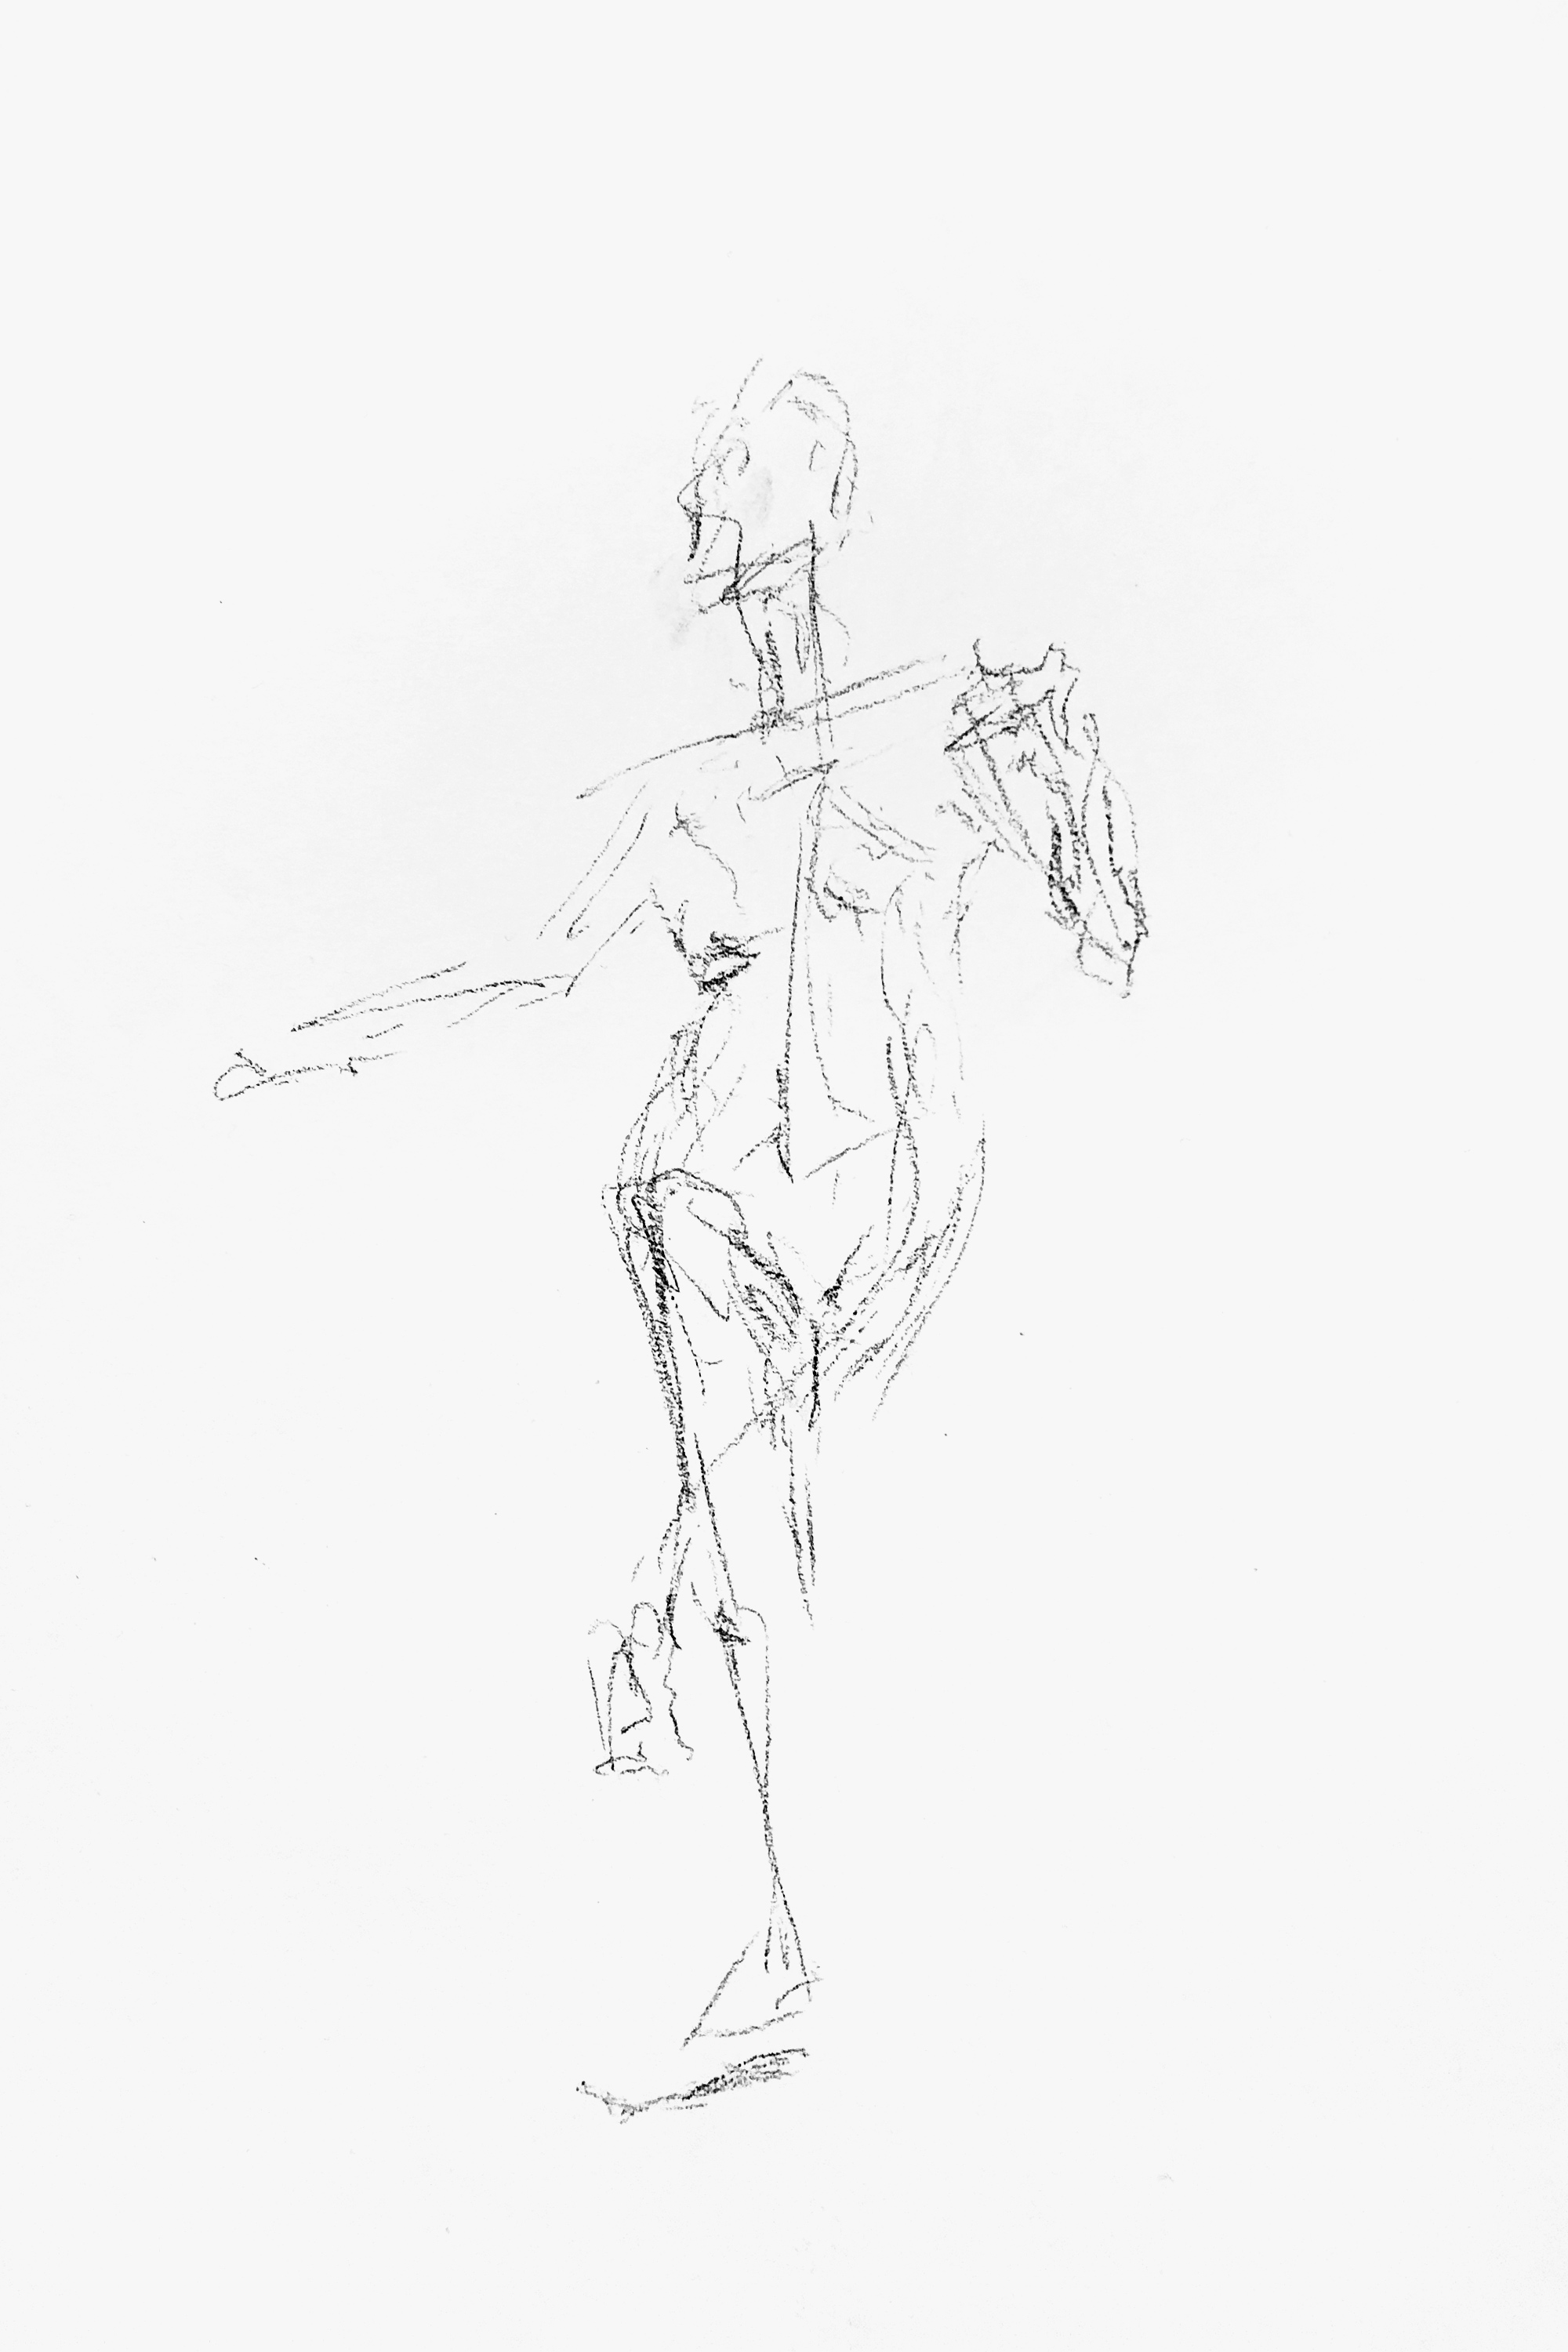 2 minute warmup life drawing in conté crayon